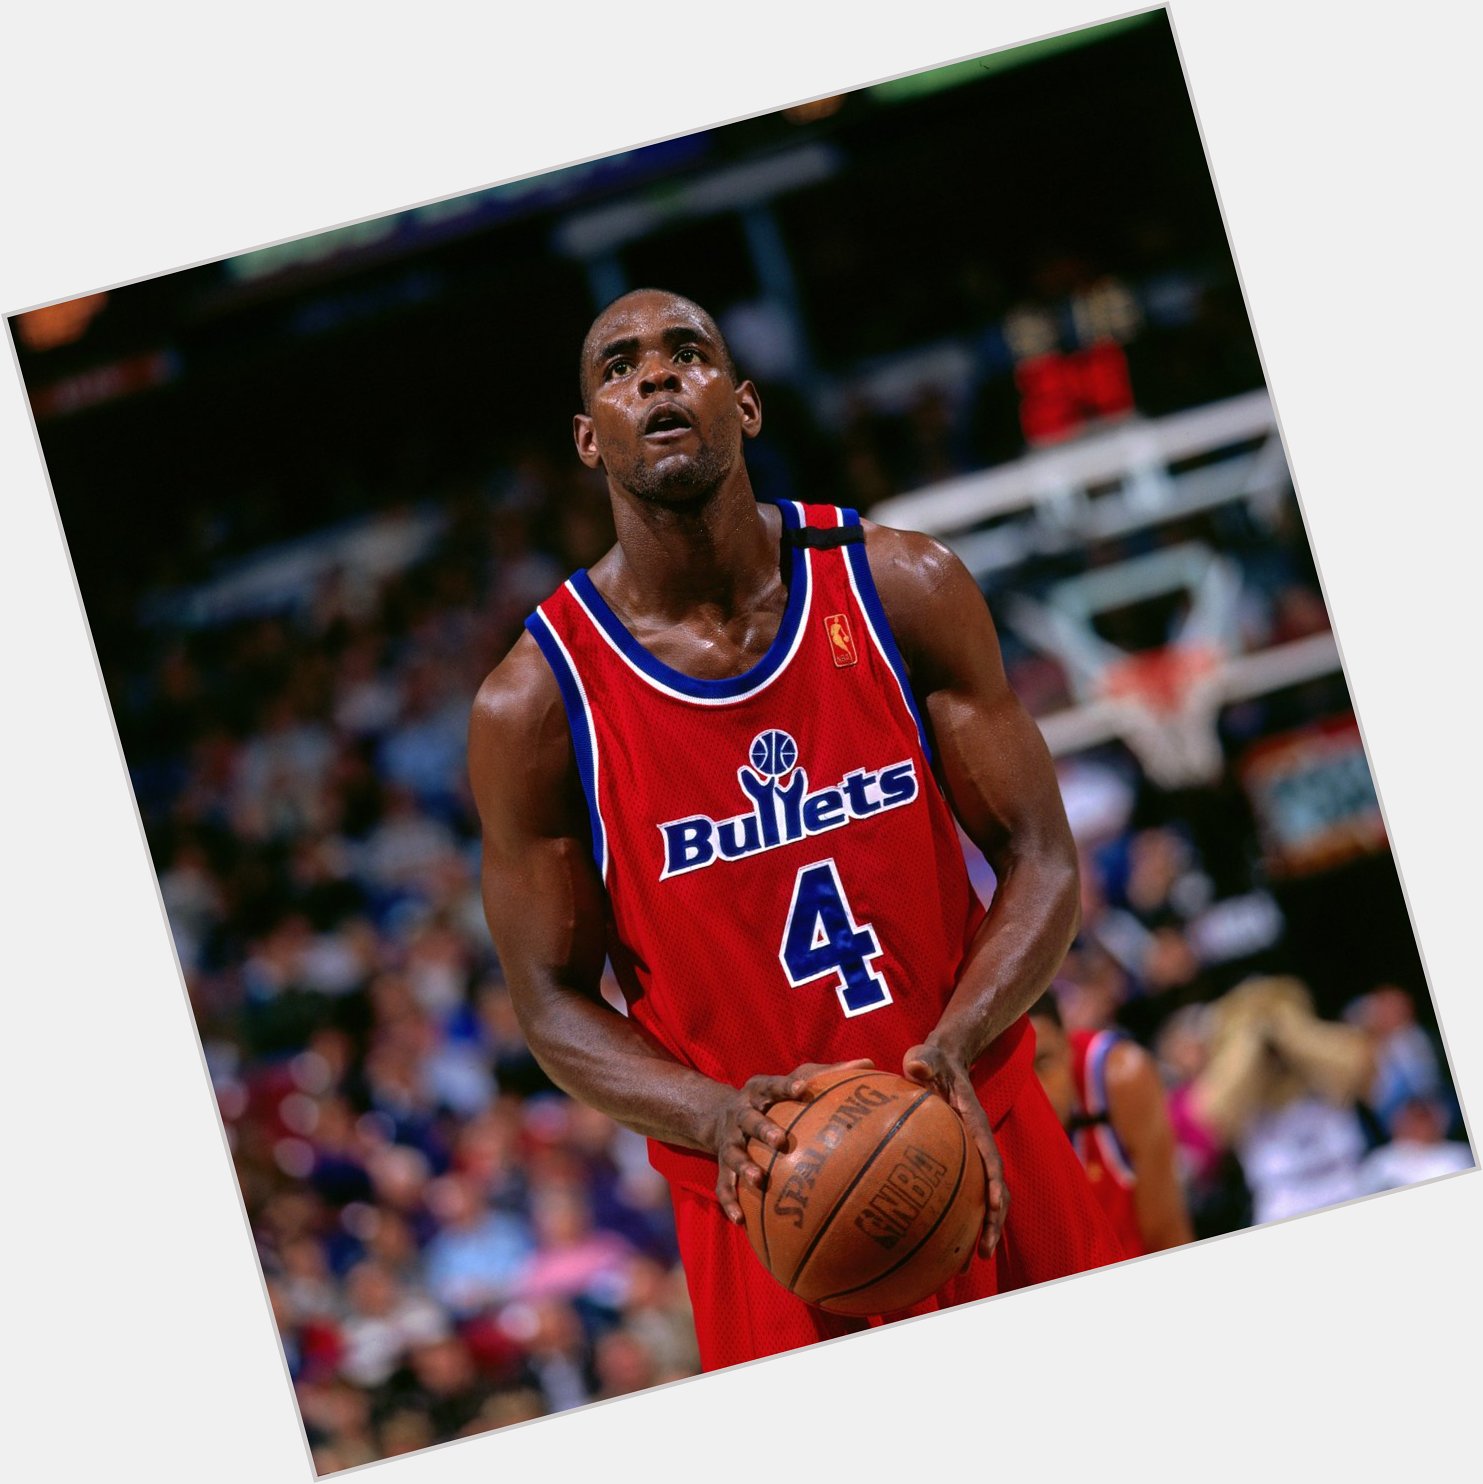 Happy birthday to former Bullet/Wizard All-Star and 2018 candidate Chris Webber!  